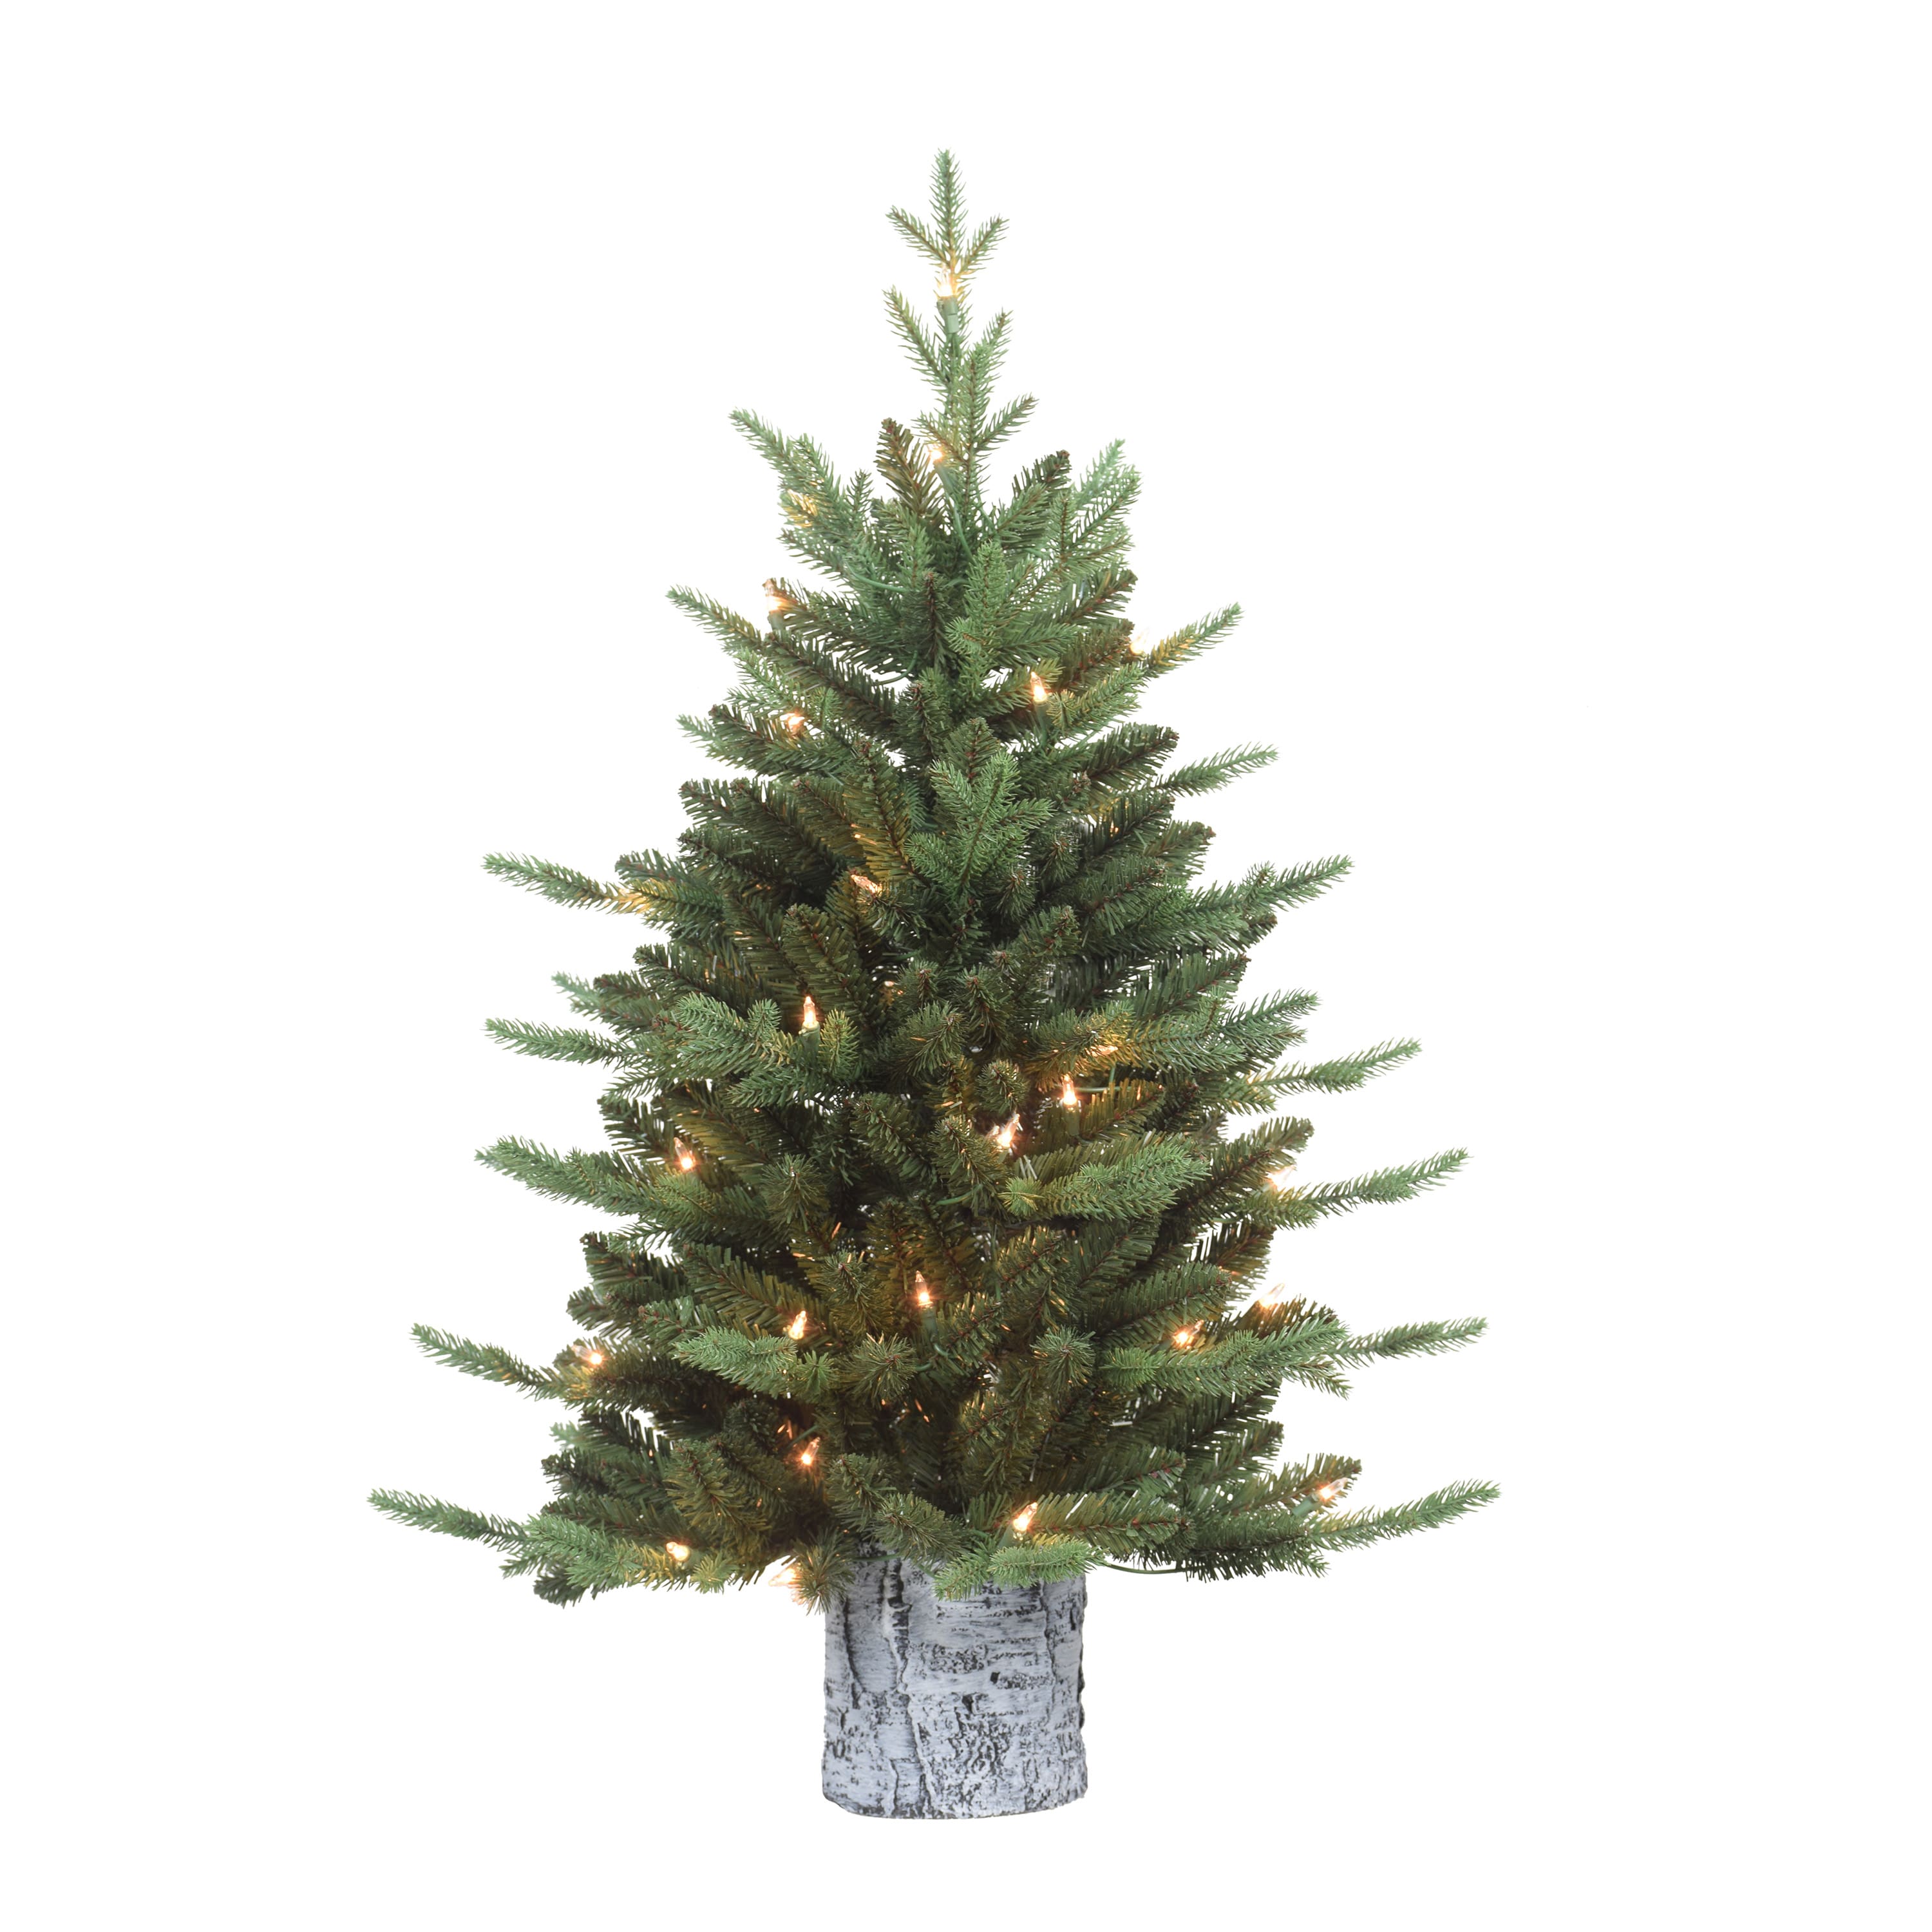 6 Pack: 3ft. Pre-Lit Artificial Christmas Tree in Planter, Clear Lights